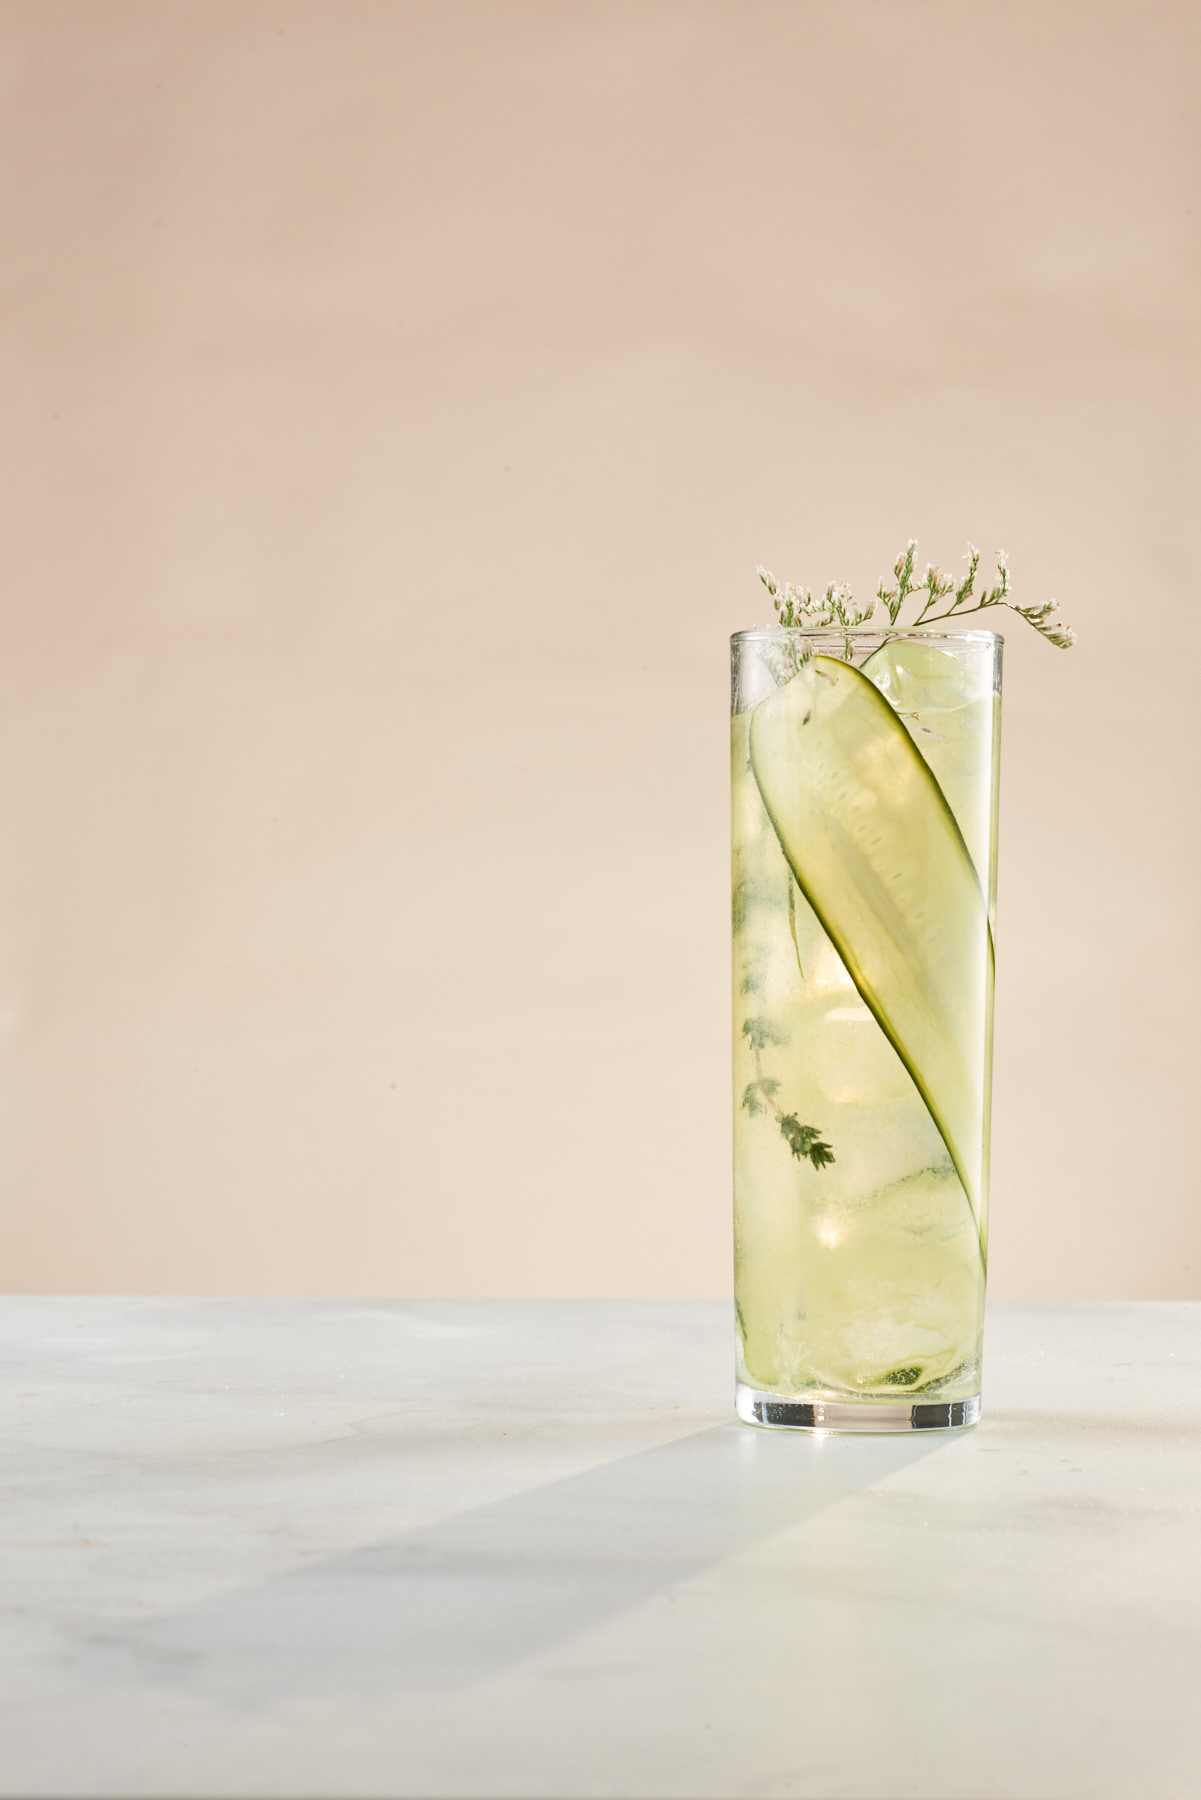 Drinks_bartender_magazine_spring_feature_cucumber_gin_cocktail_commercial_beverage_photography